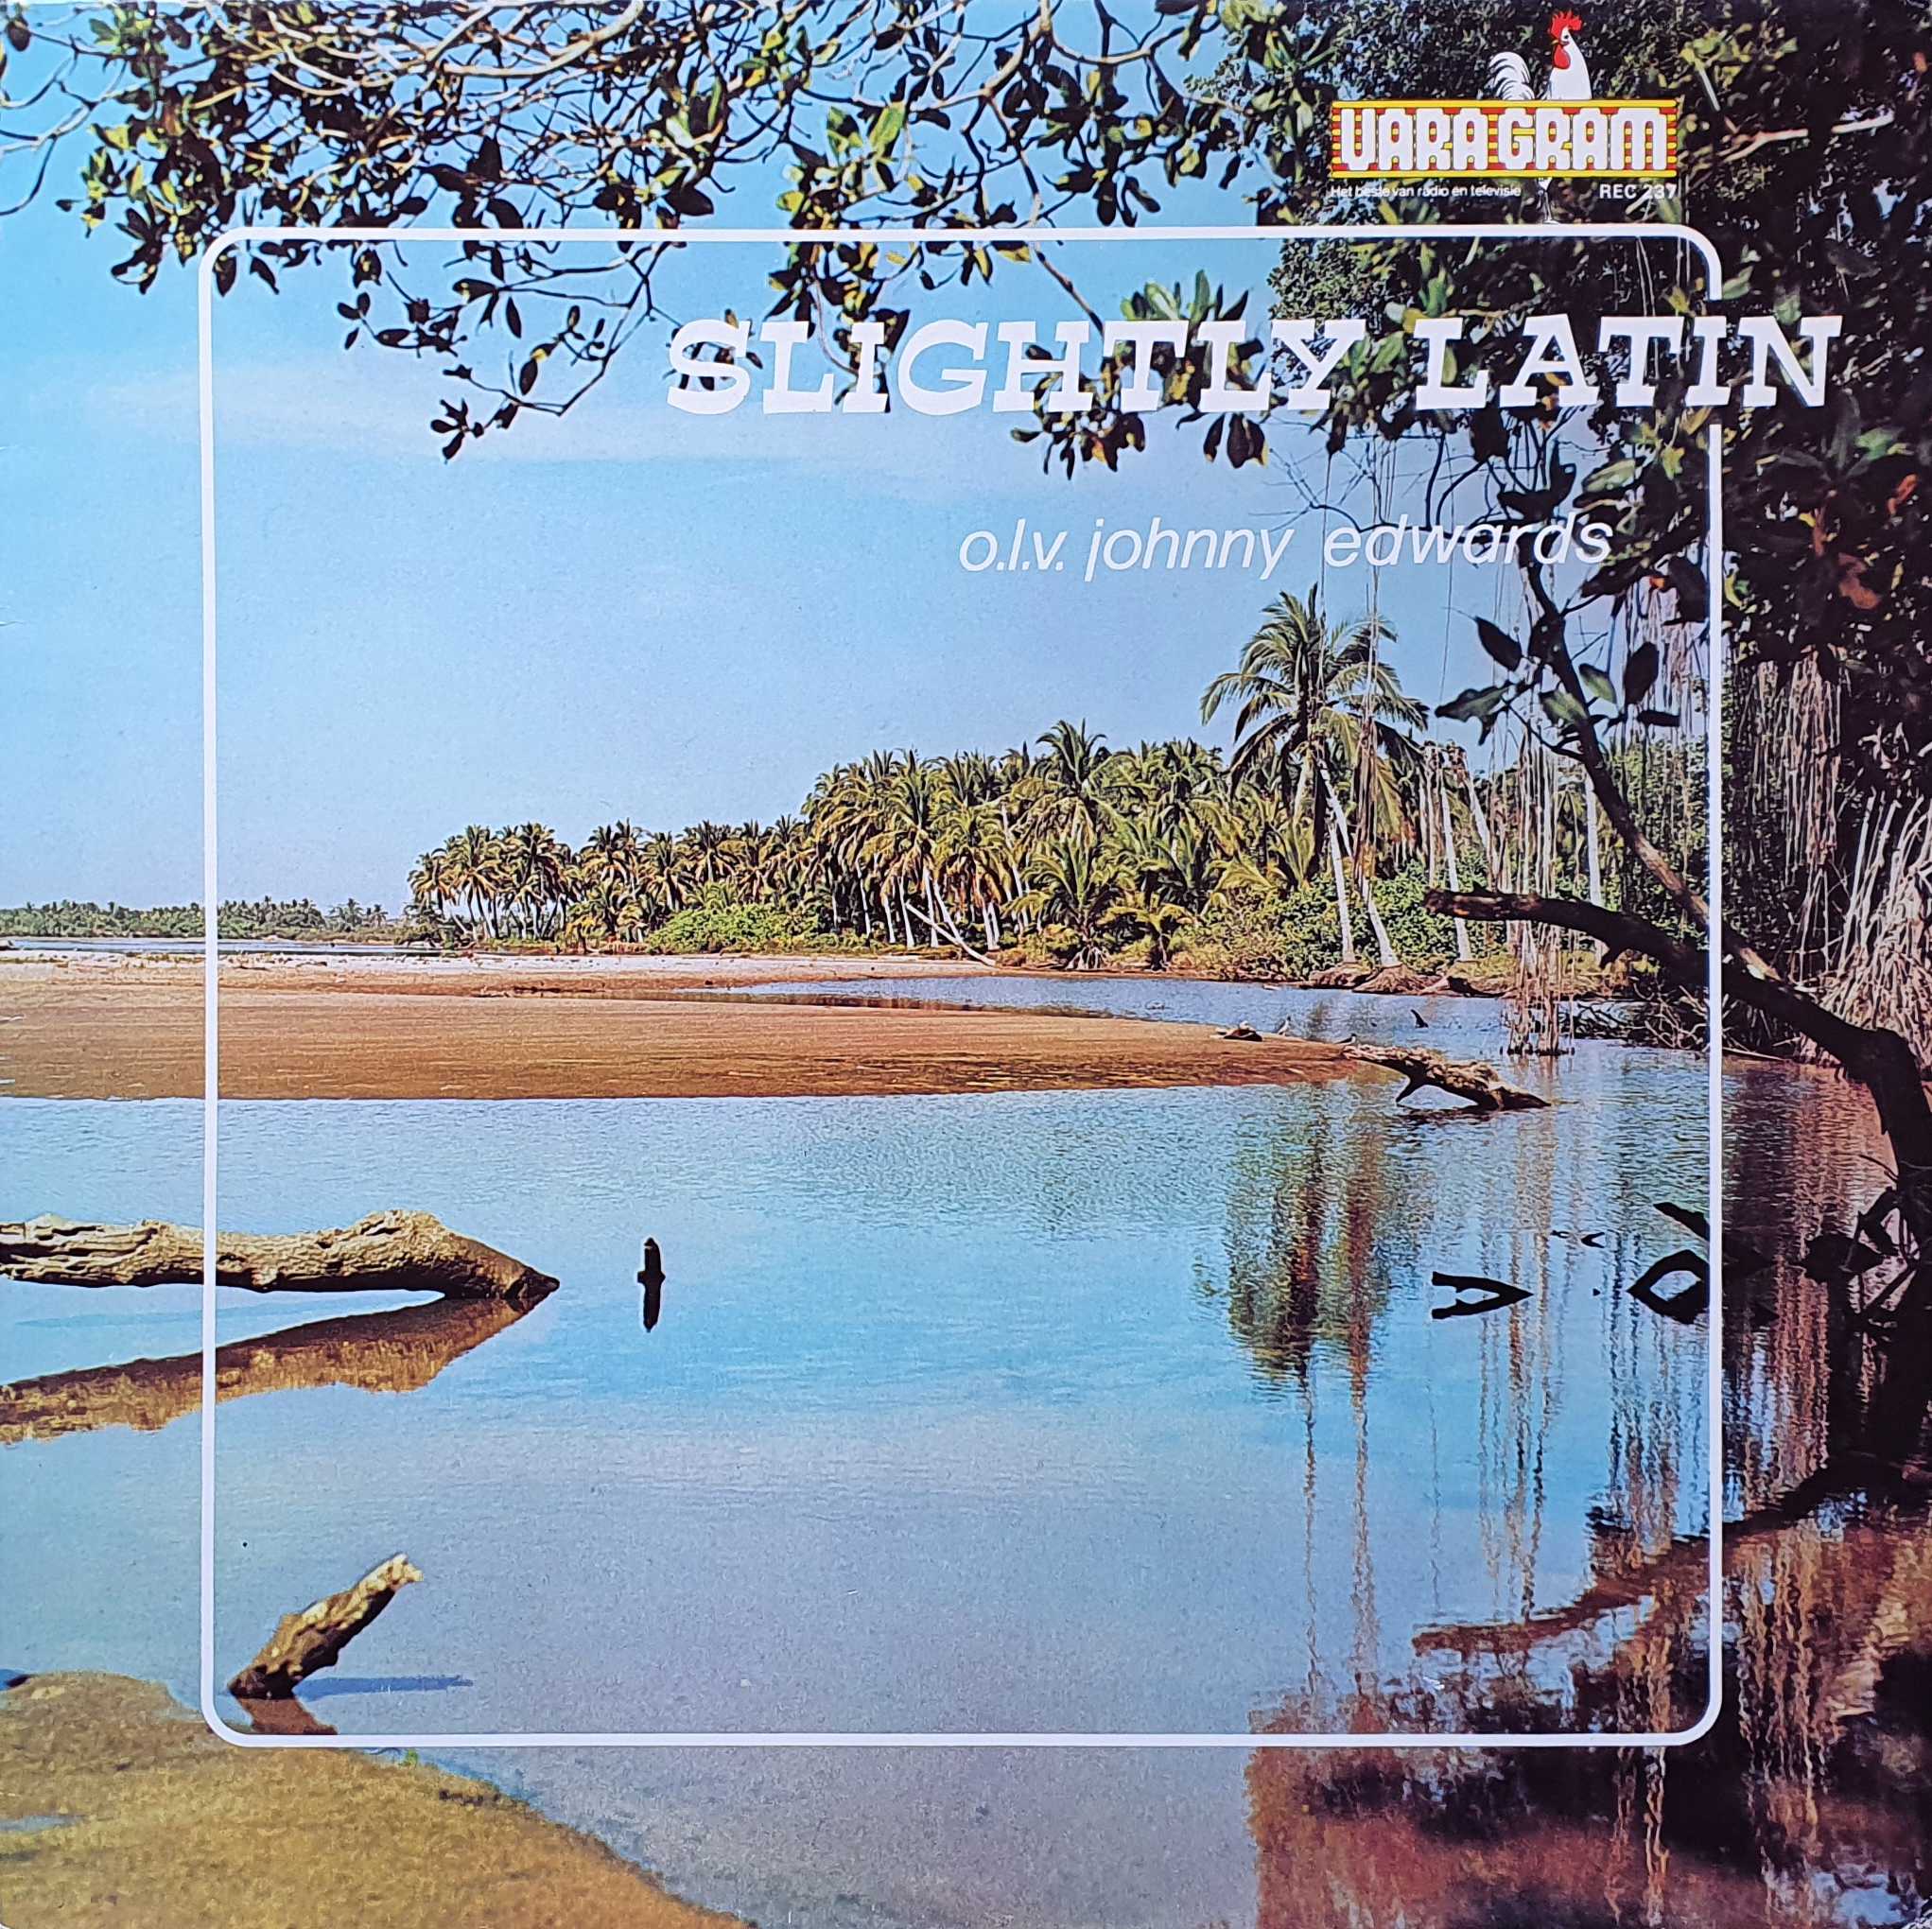 Picture of REC 237-iD Slightly Latin (Dutch import) by artist Various from the BBC albums - Records and Tapes library